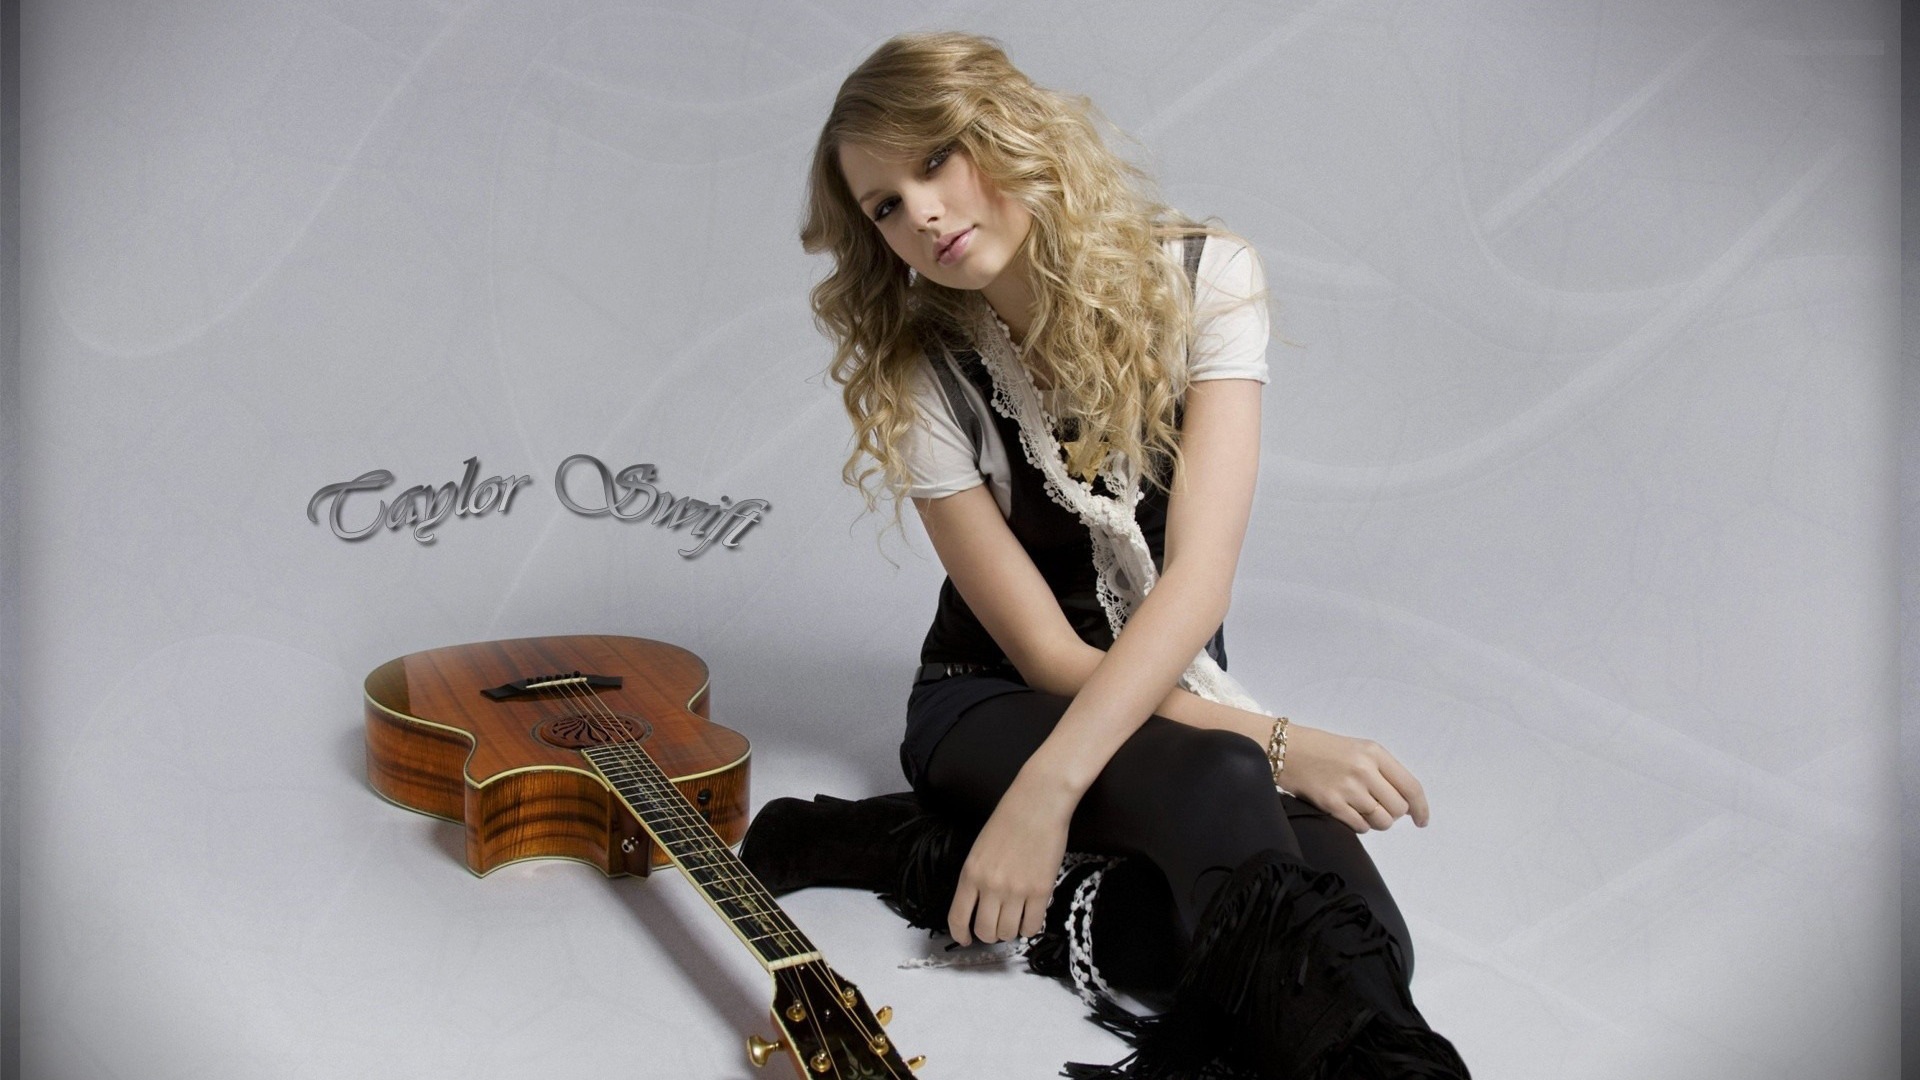 Taylor Swift Hd Wallpapers 12 Free High Definition Unique Hd